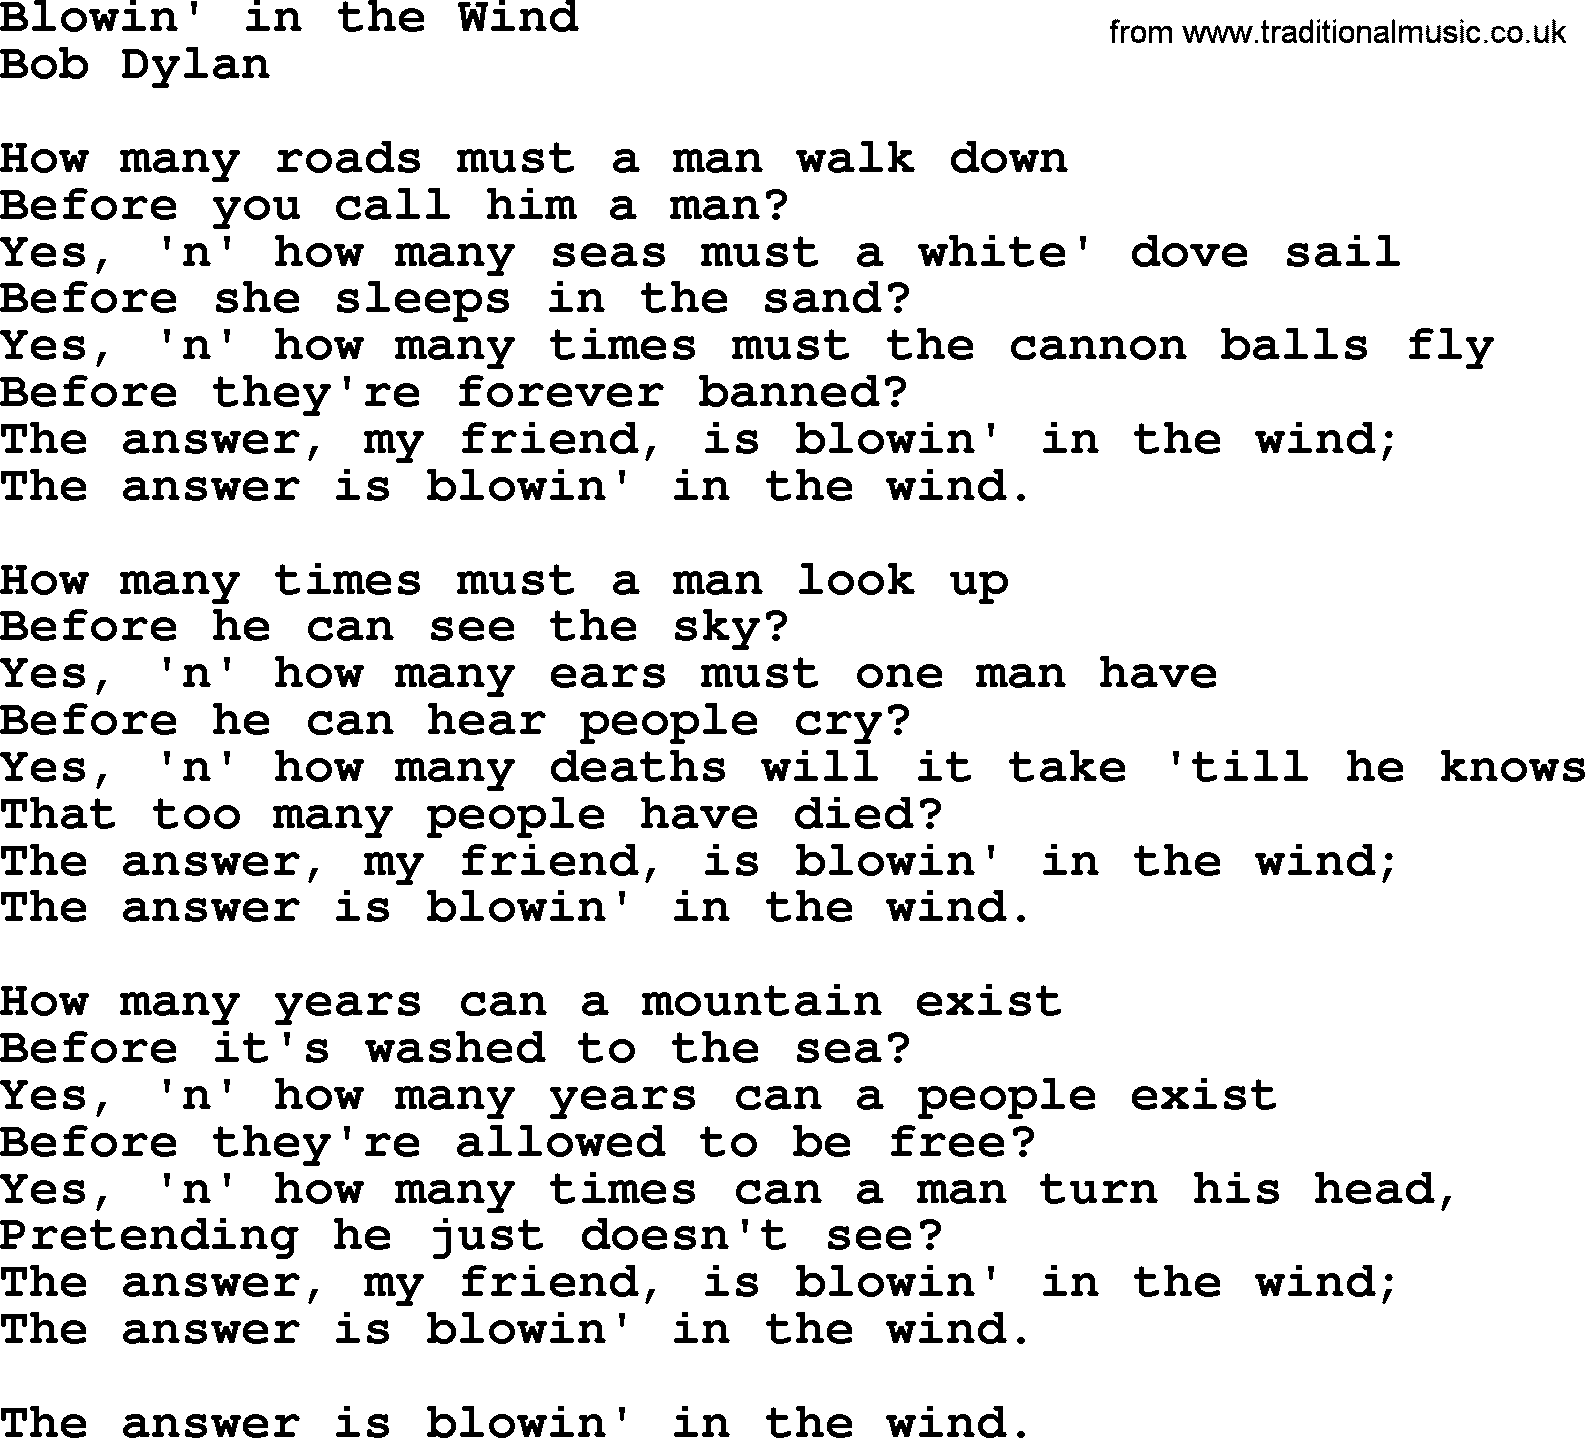 Political, Solidarity, Workers or Union song: Blowin In The Wind, lyrics